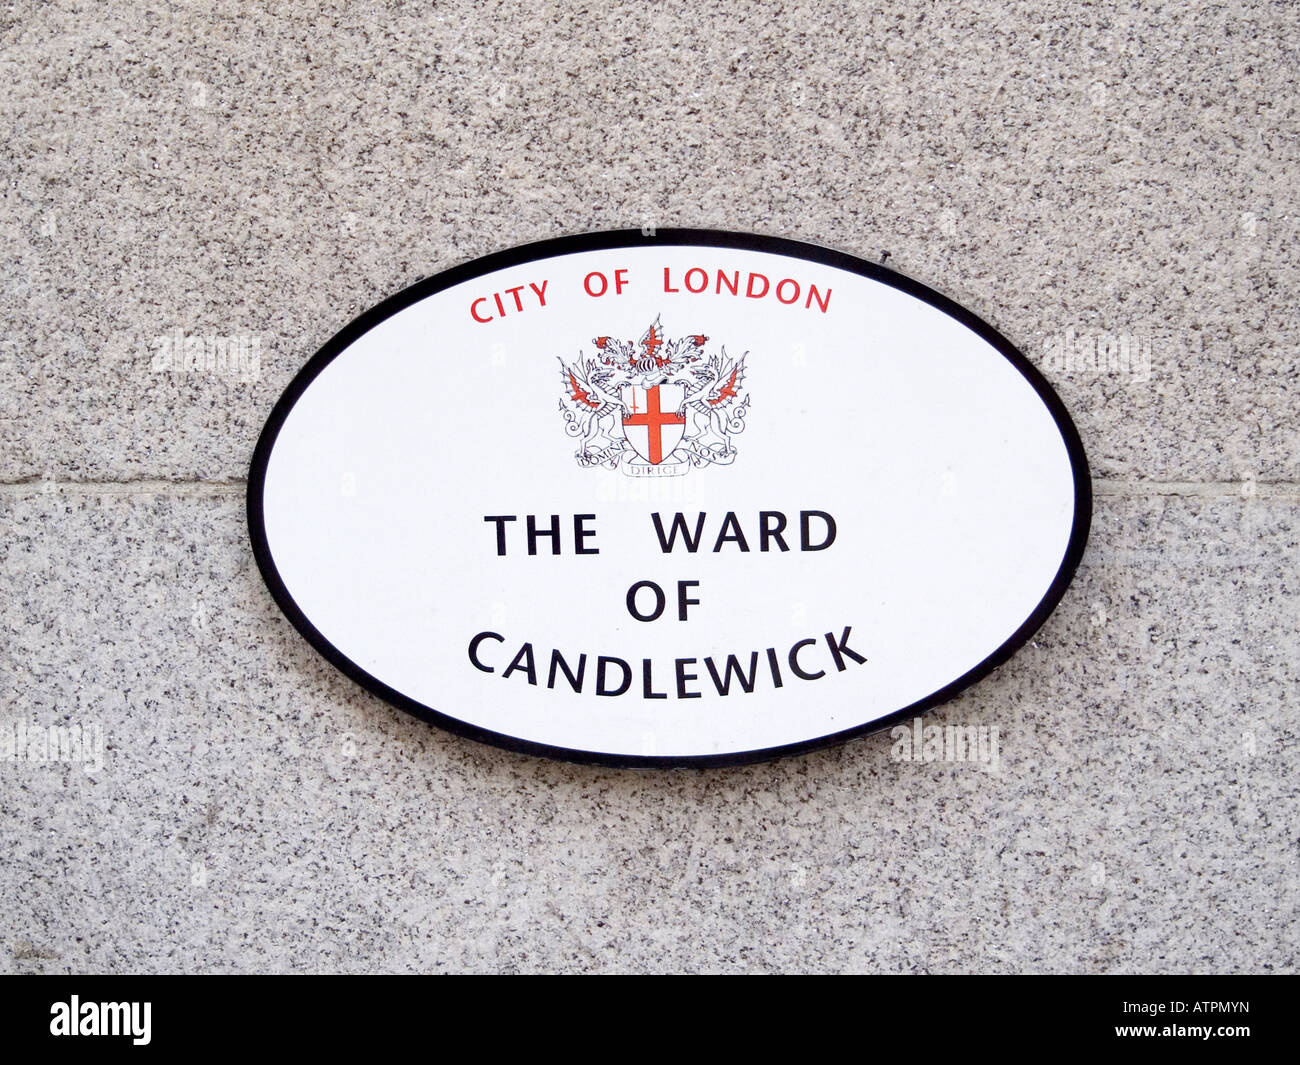 Wall plaque notice or sign showing the Ward of Candlewick in the City of London England Stock Photo